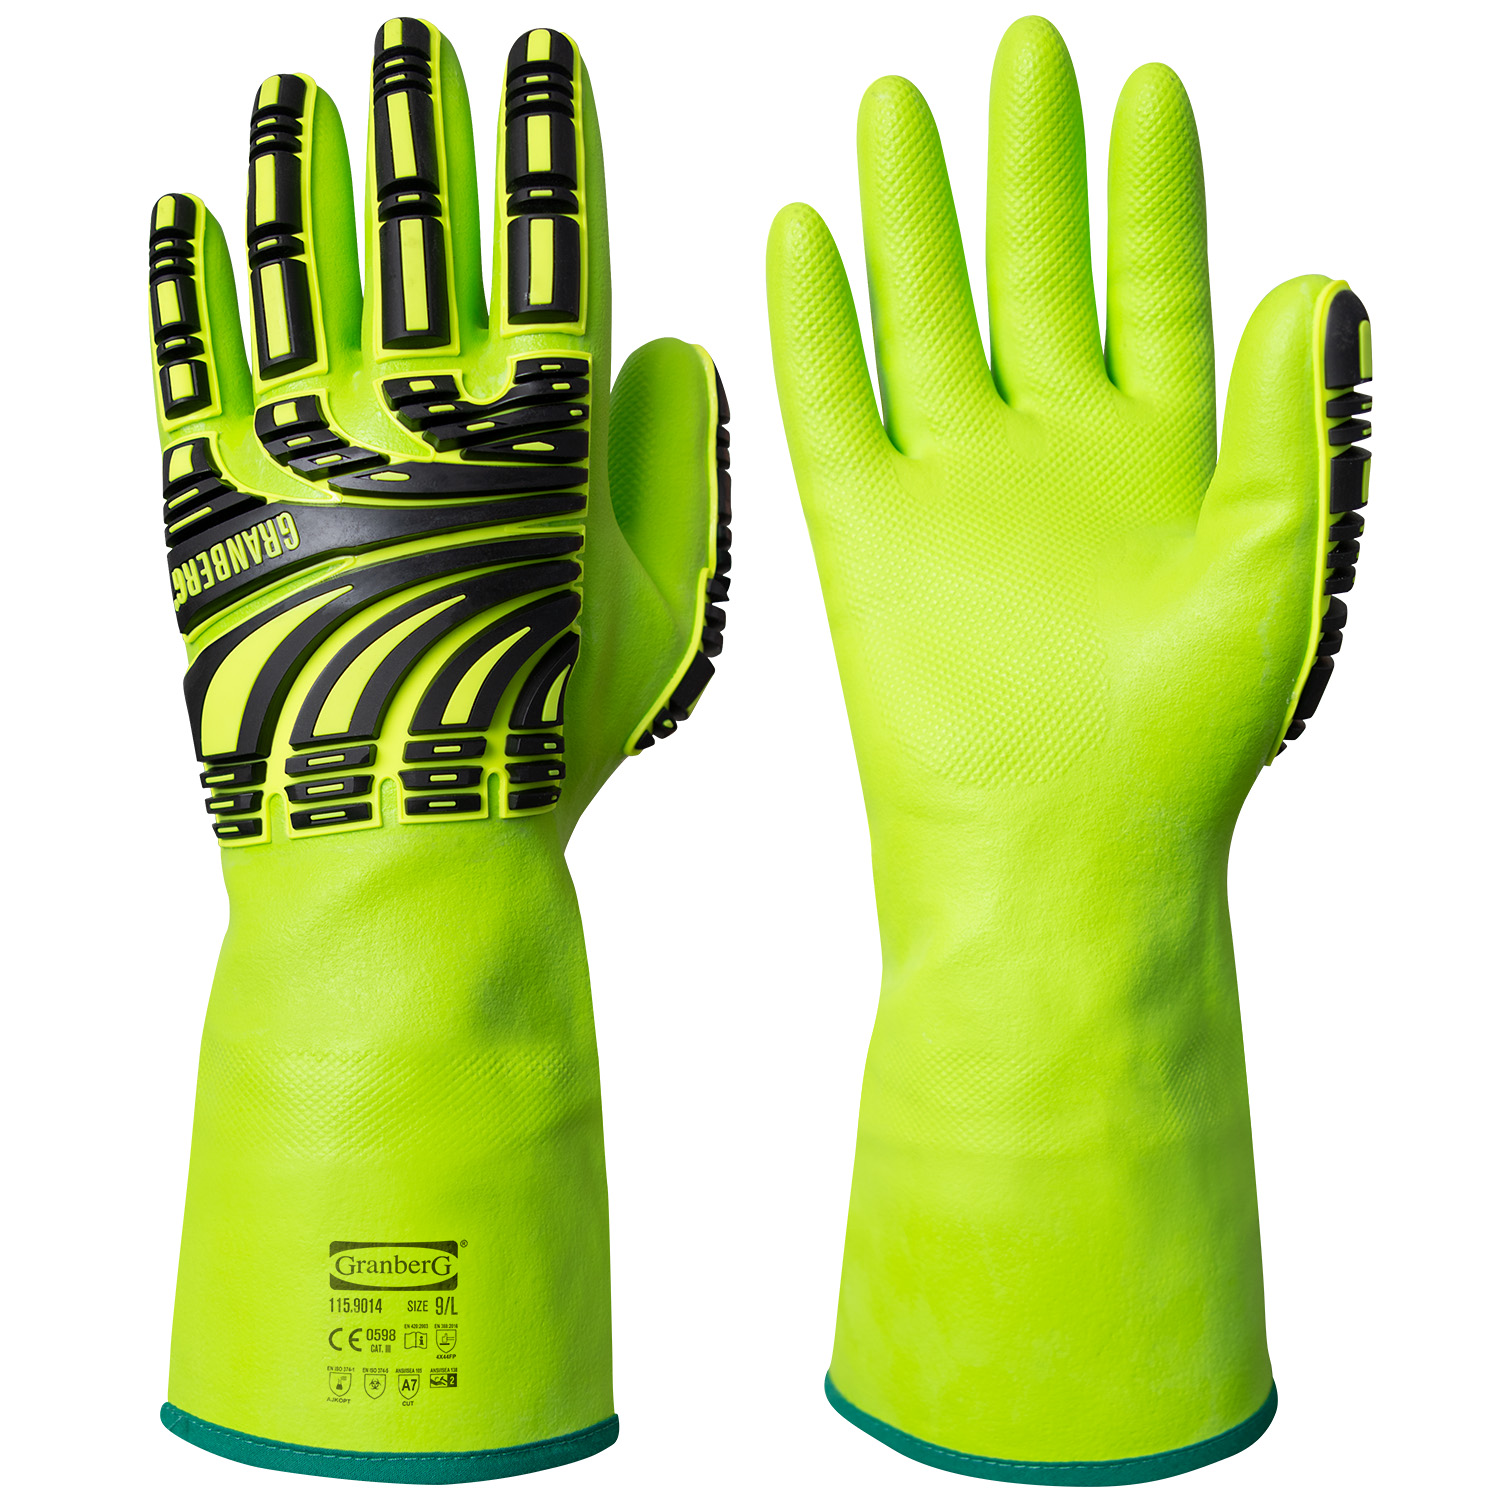 length 32 cm Size 10 Chemical Protective Gloves Nitrile Green 